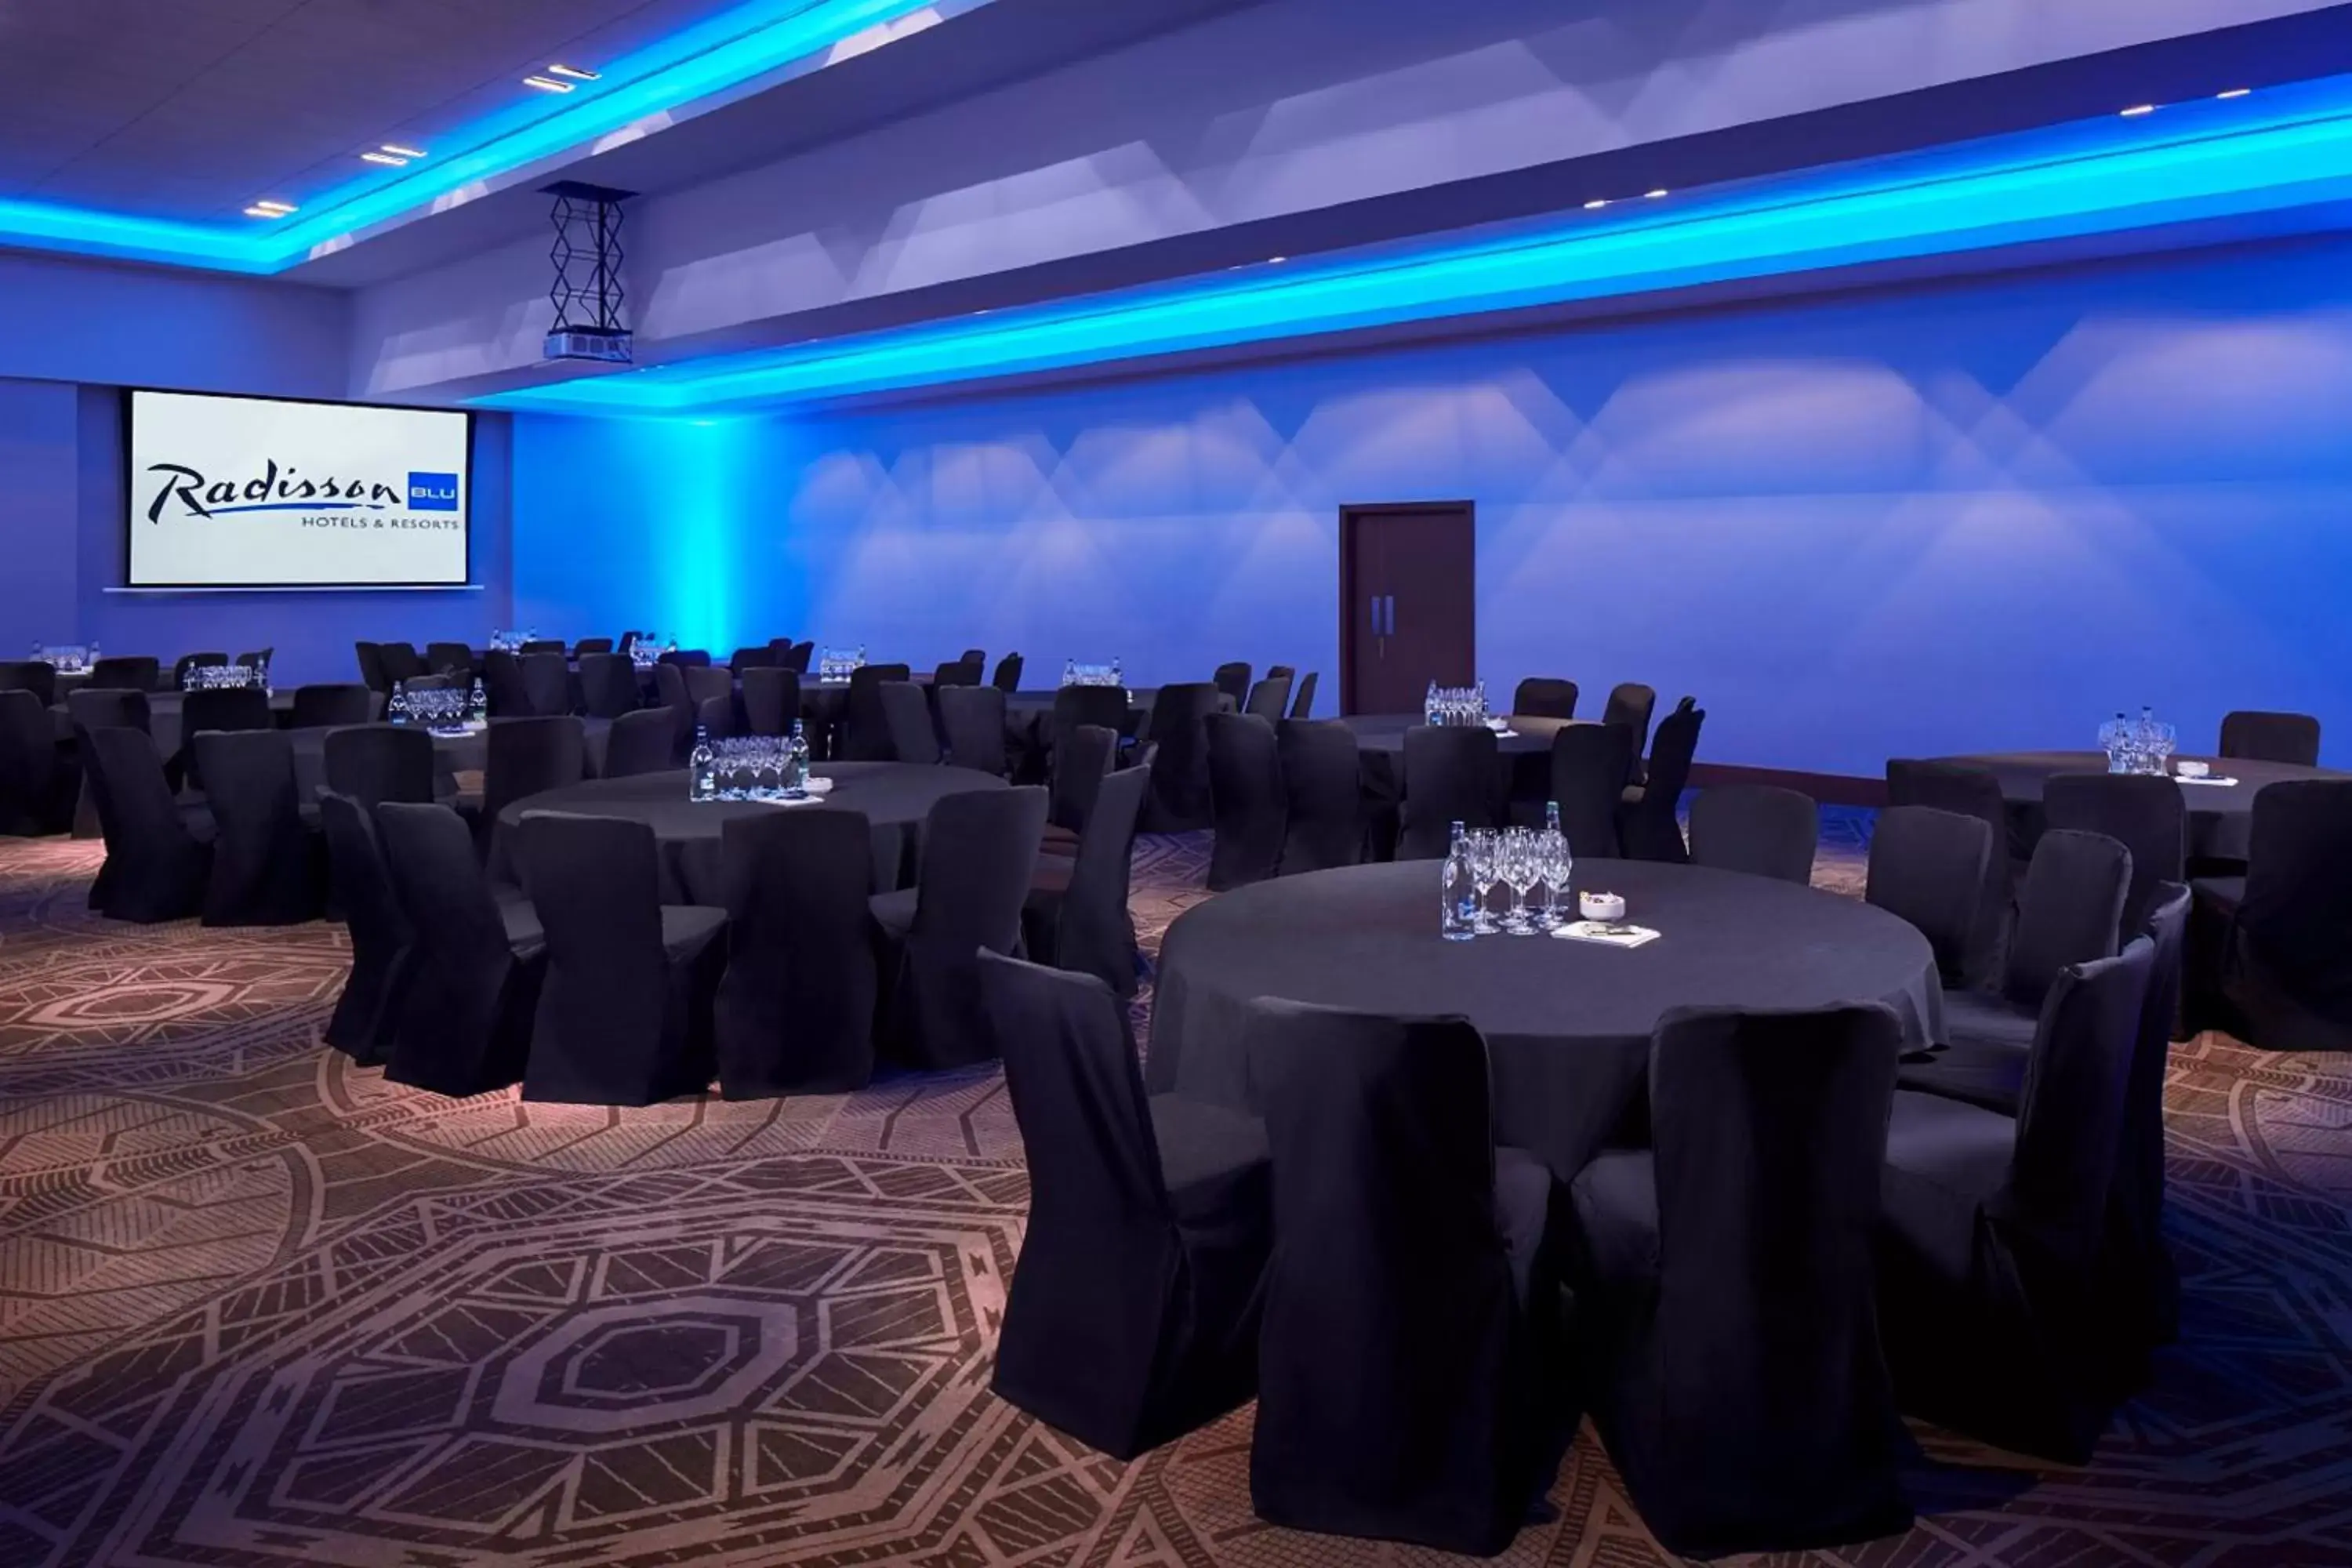 Meeting/conference room, Banquet Facilities in Radisson Blu Hotel, Glasgow